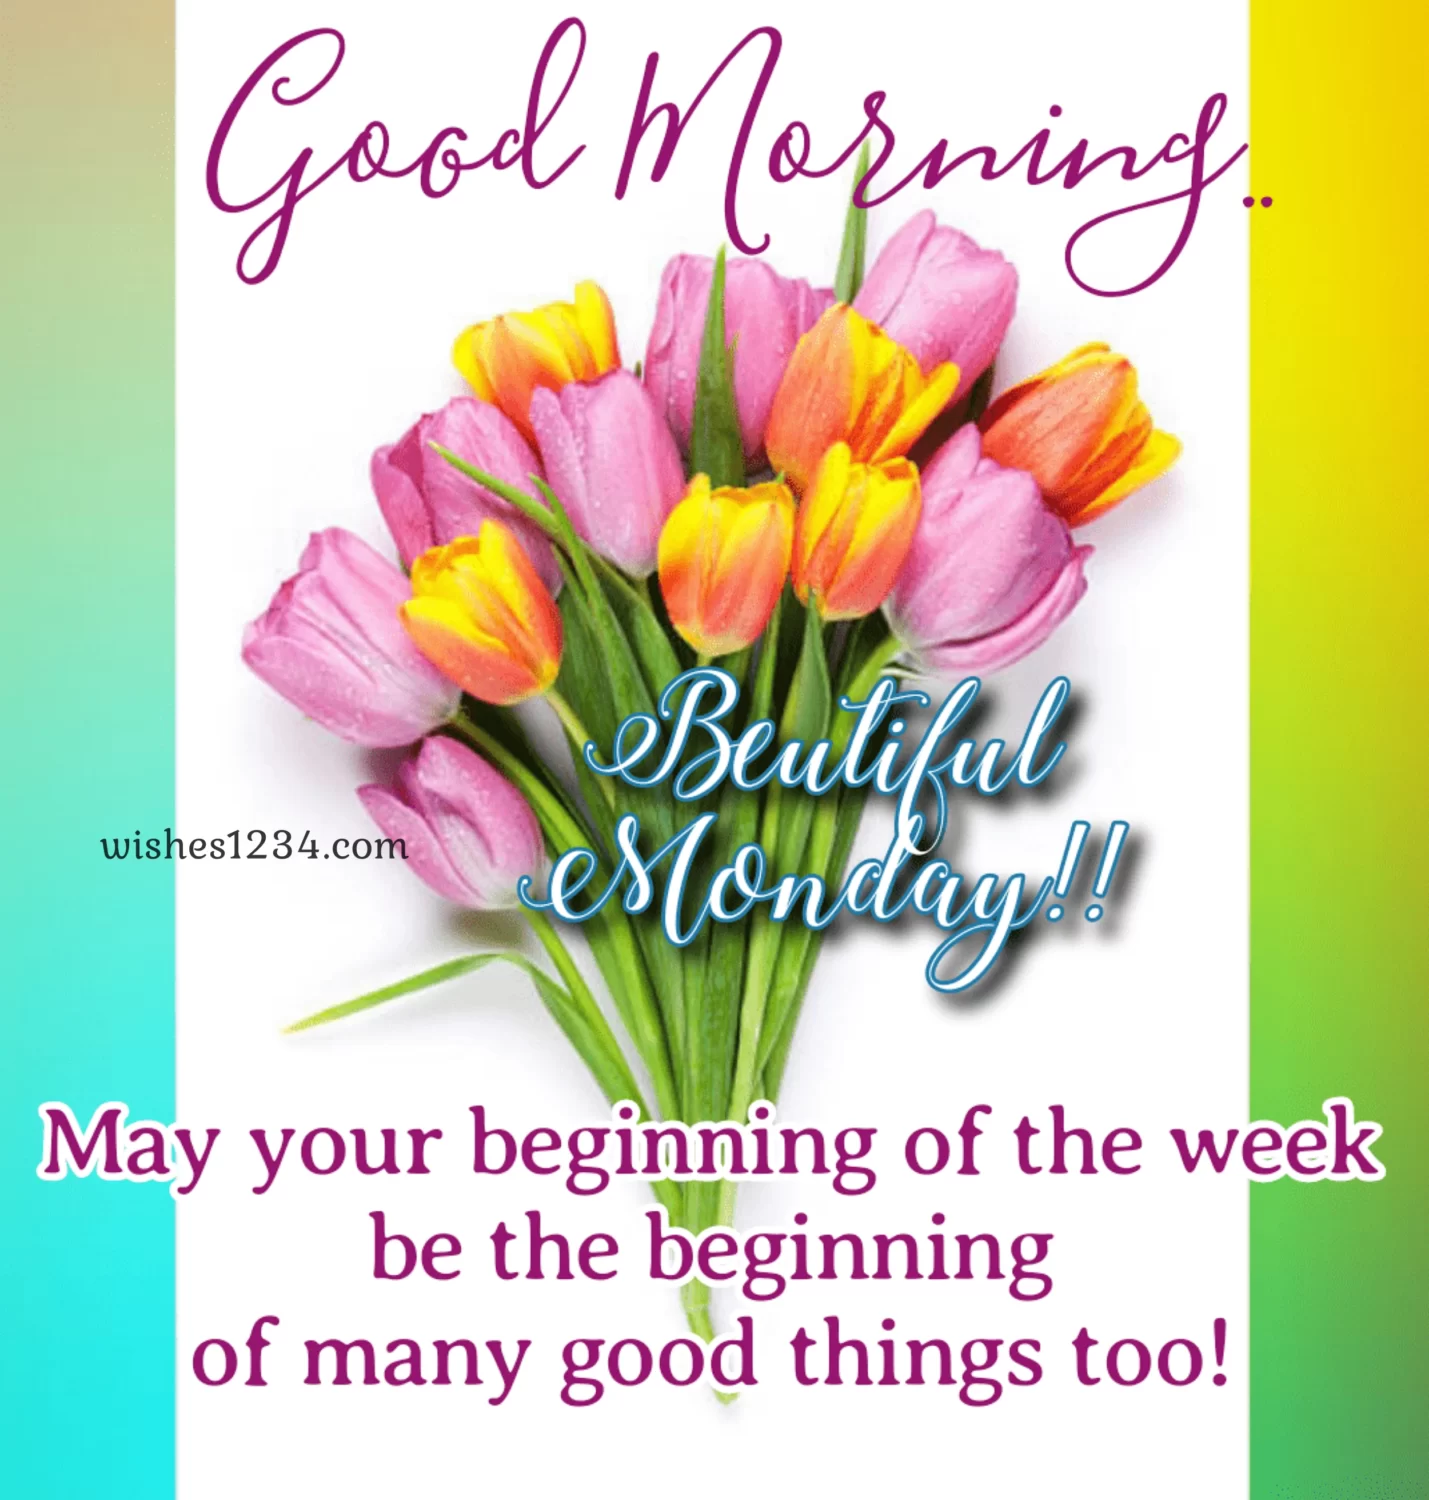 Monday greeting with Pink and yellow tulip flower bouquet, Good Monday morning.